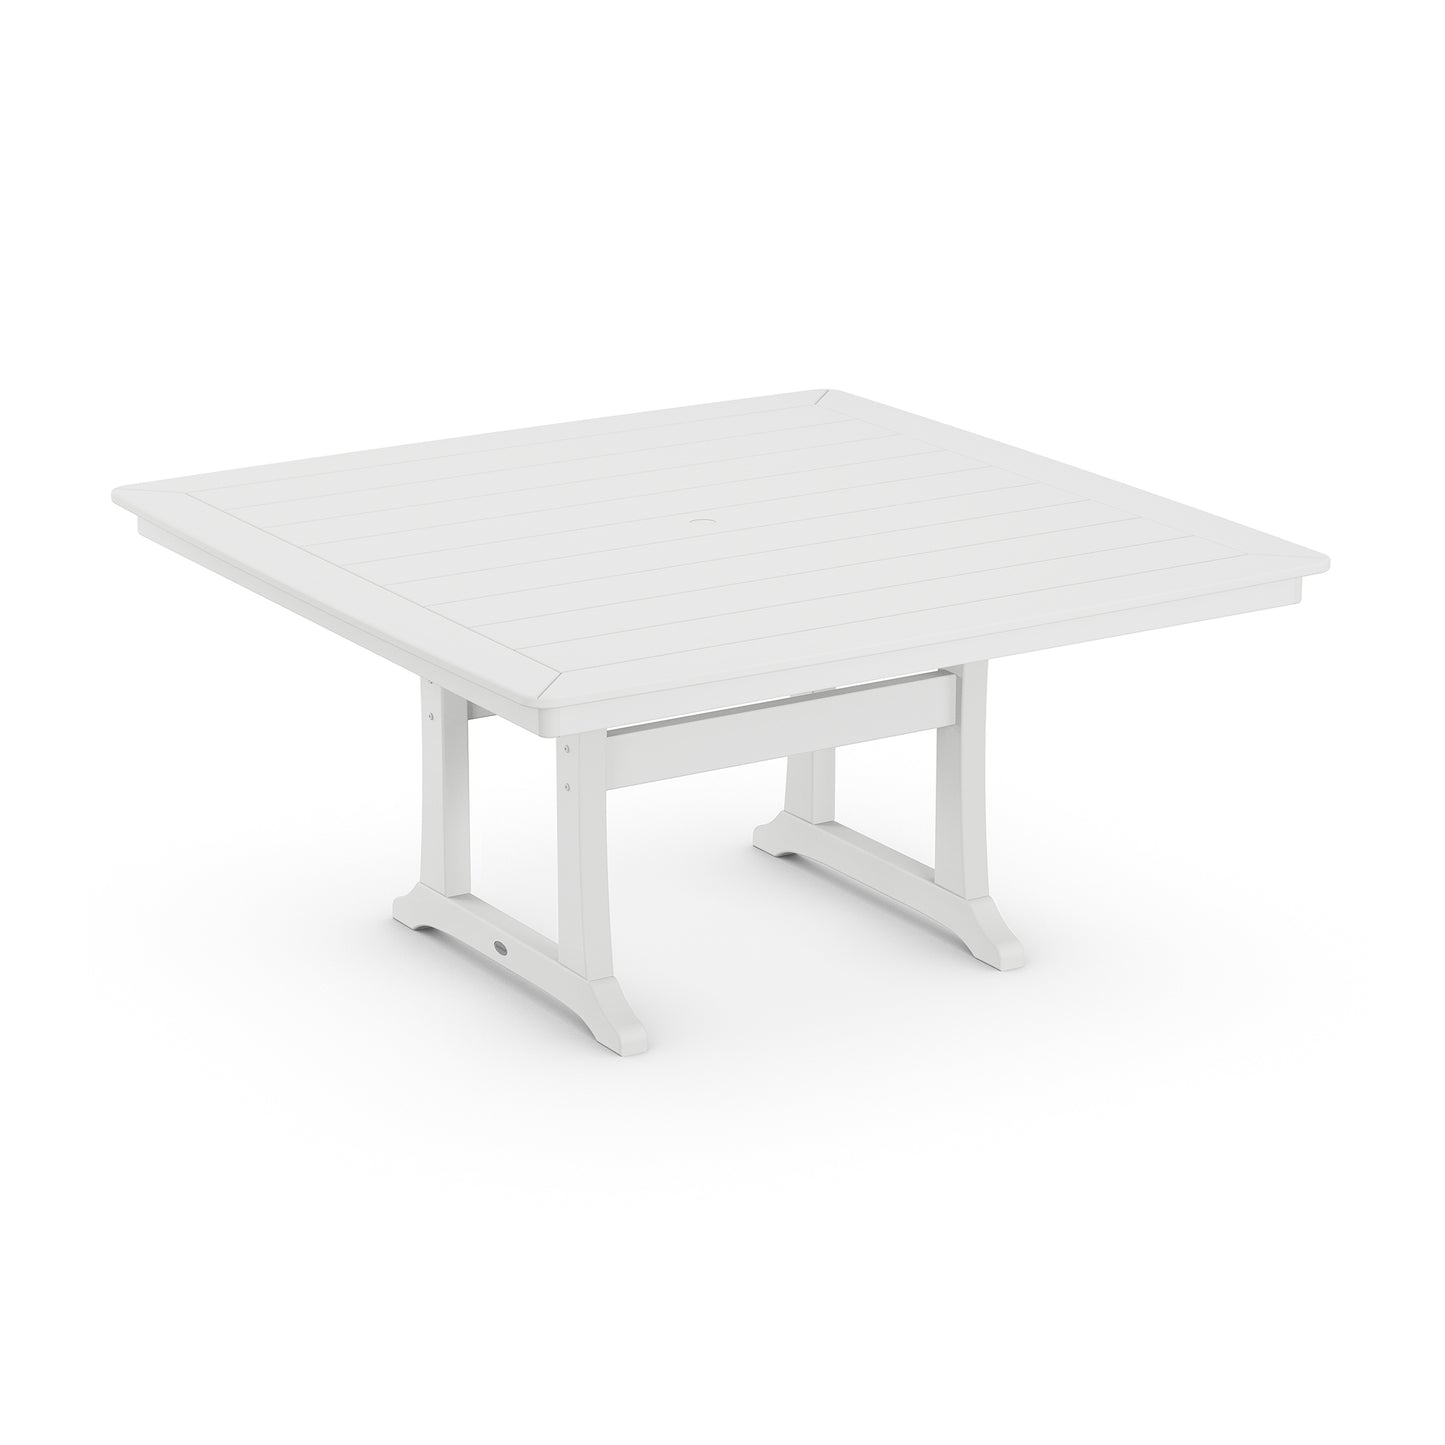 A white square POLYWOOD® Nautical Trestle 59" Dining Table with a slatted top and a sturdy double pedestal base, shown against a plain white background.